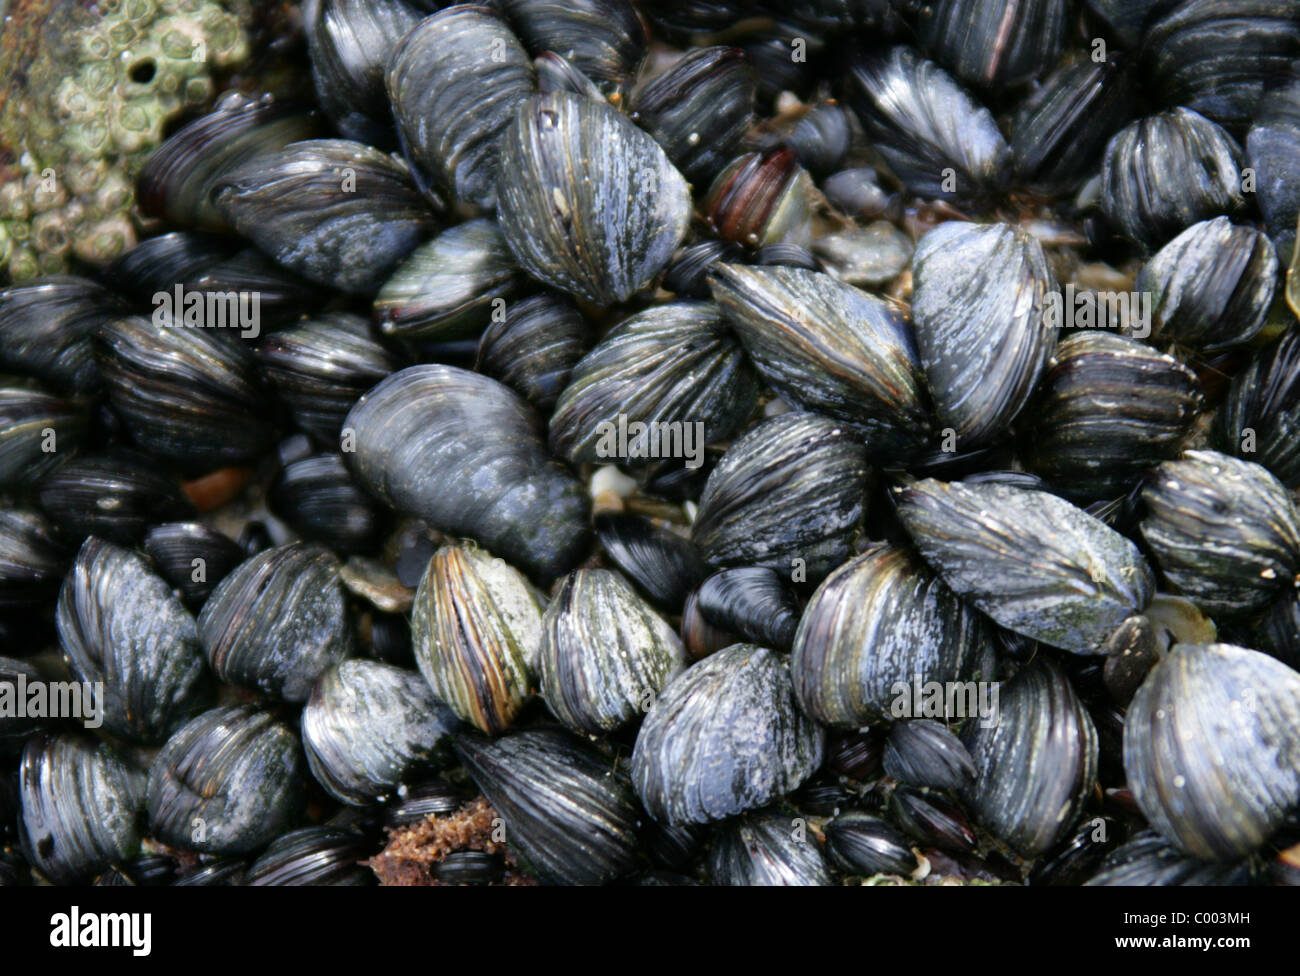 Blue Mussels, Mytilus edulis, Mytilidae, Bivalvia, Mollusca, in the Intertidal Zone in Cornwall, England. Stock Photo